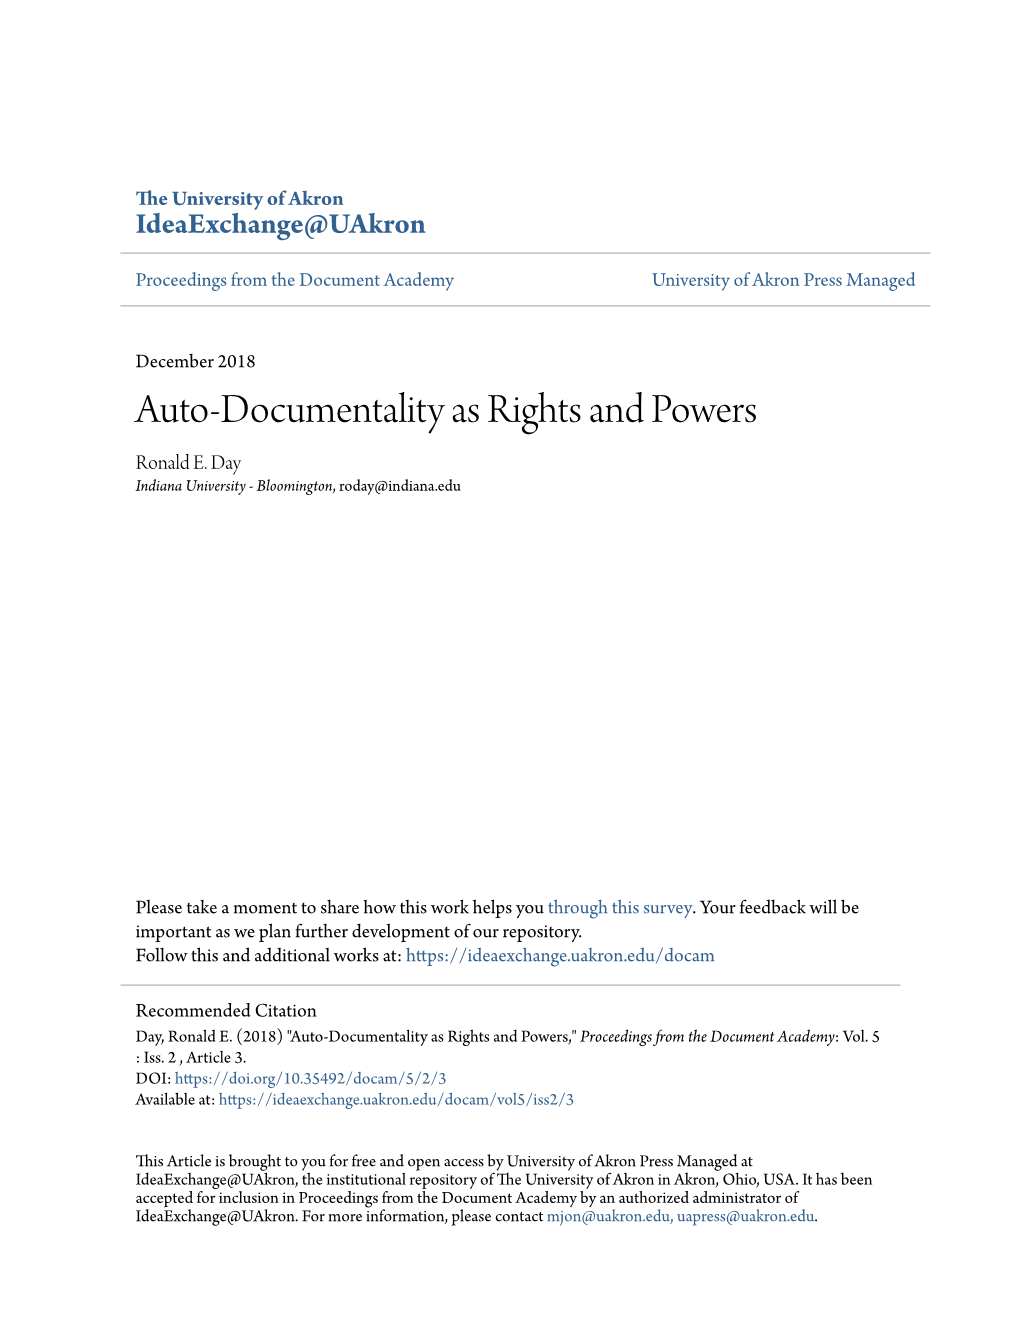 Auto-Documentality As Rights and Powers Ronald E